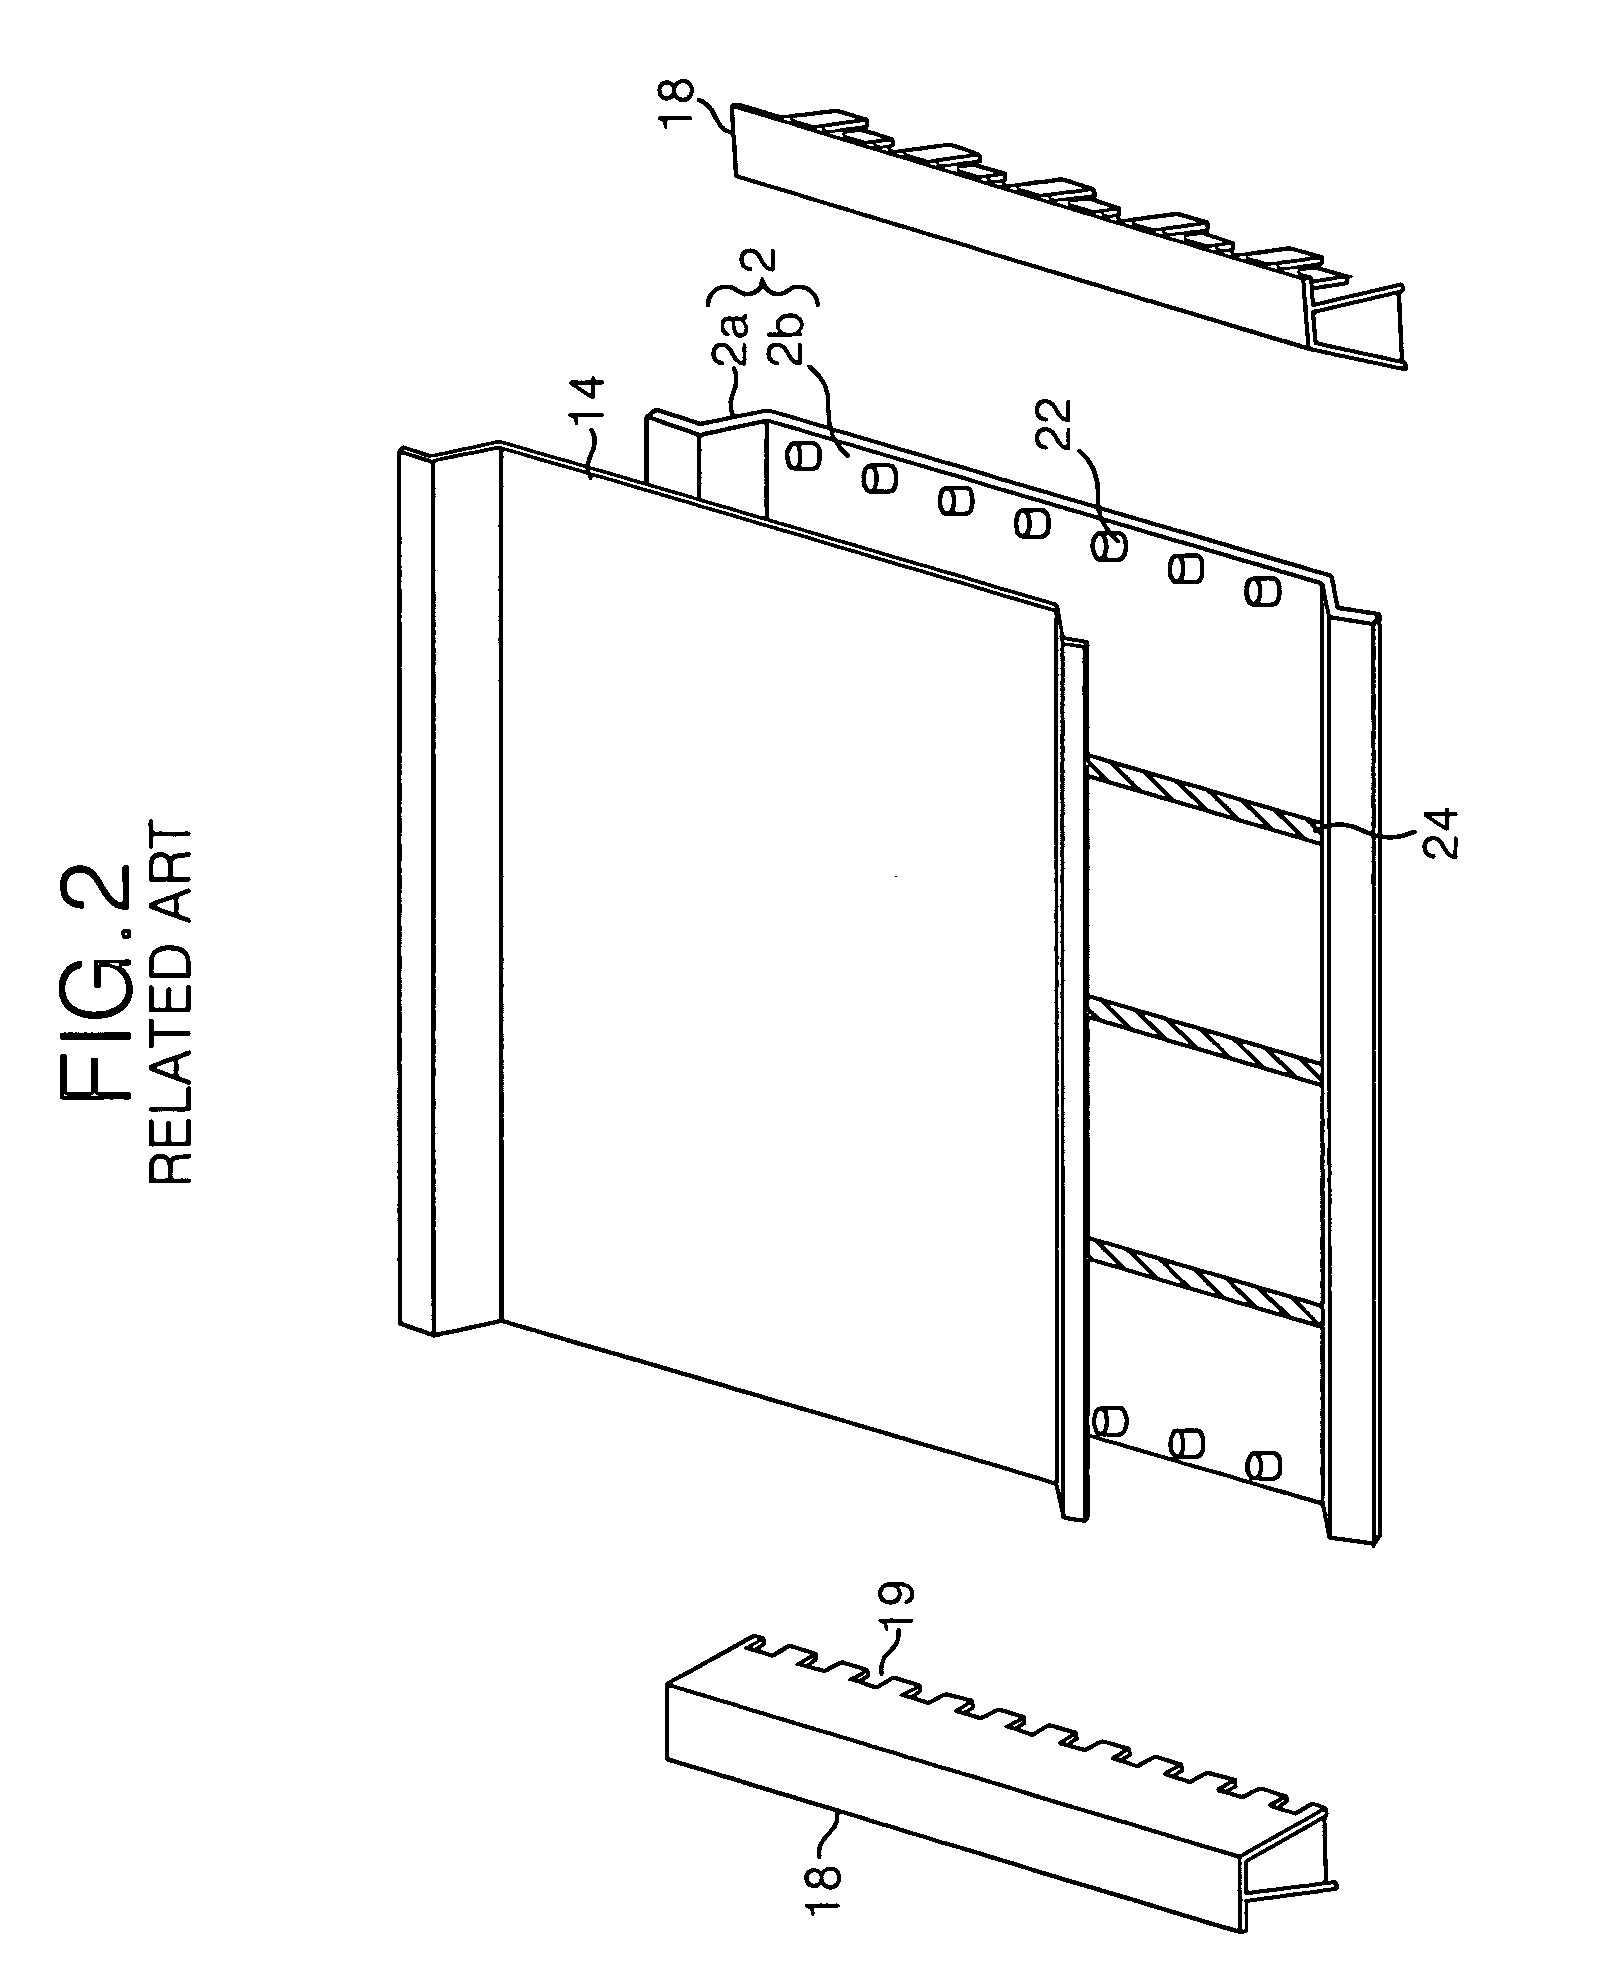 Liquid crystal display module and assembling method thereof